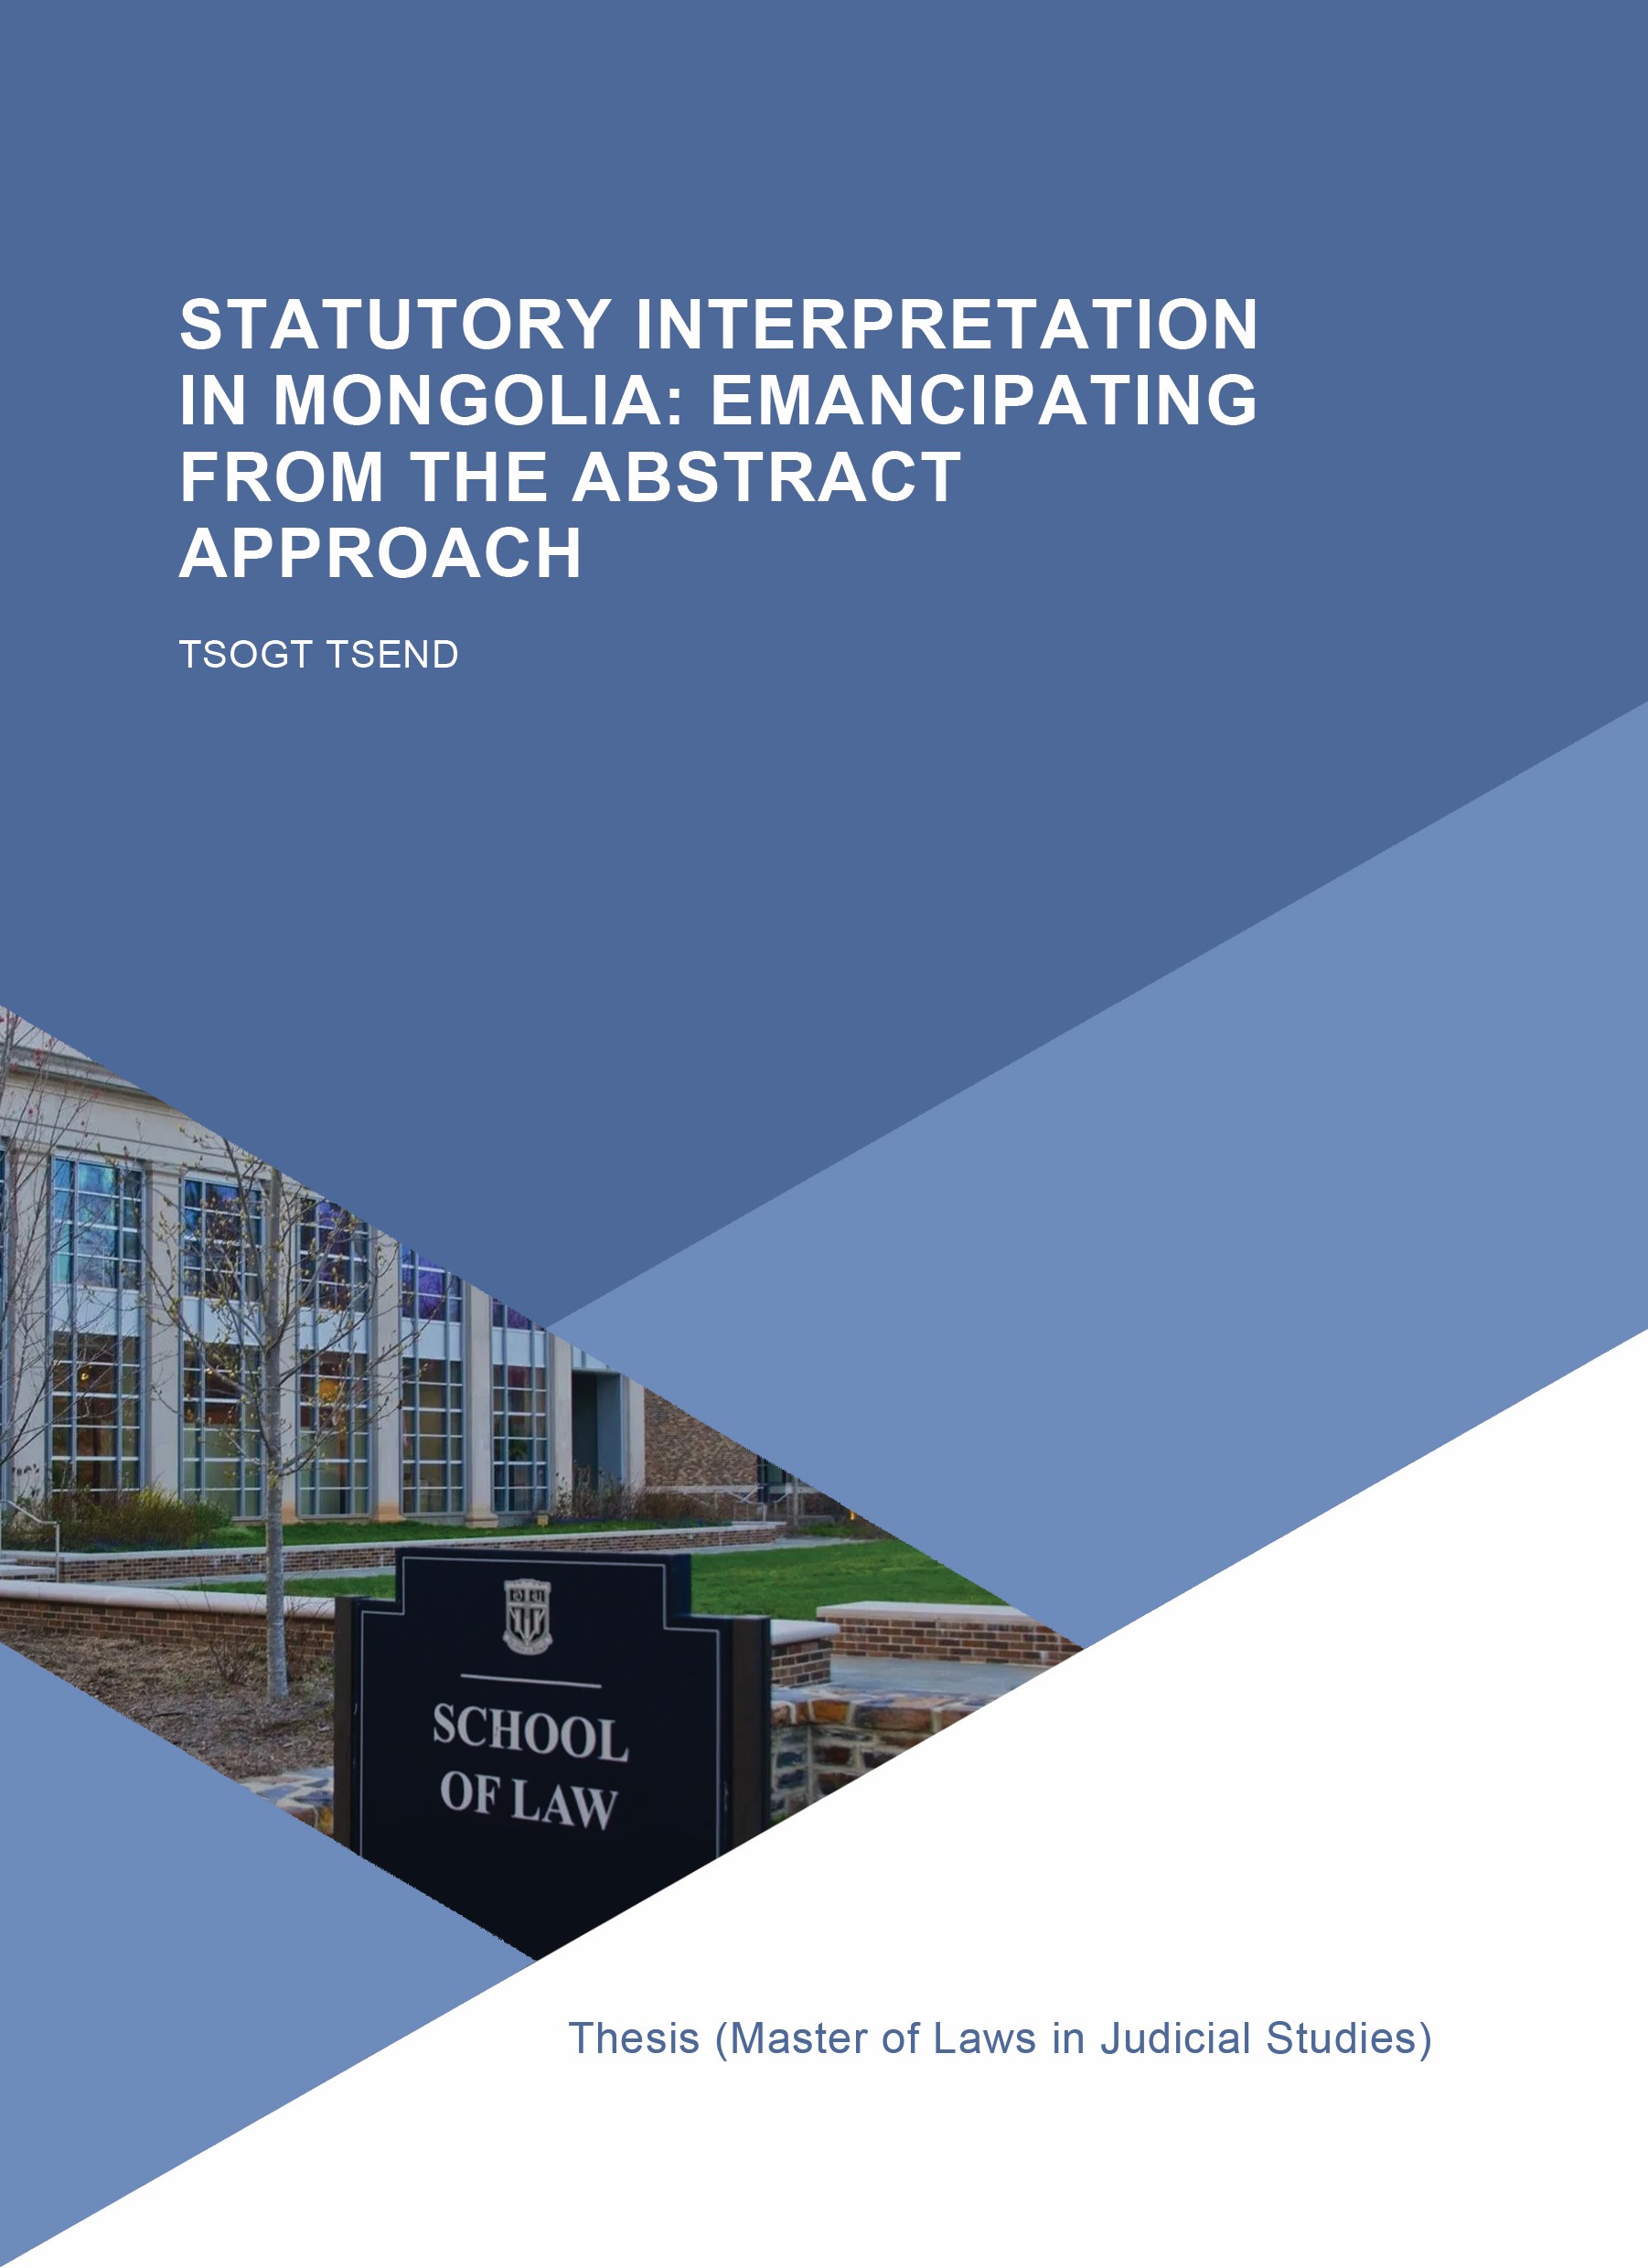 STATUTORY INTERPRETATION IN MONGOLIA: EMANCIPATING FROM THE ABSTRACT APPROACH